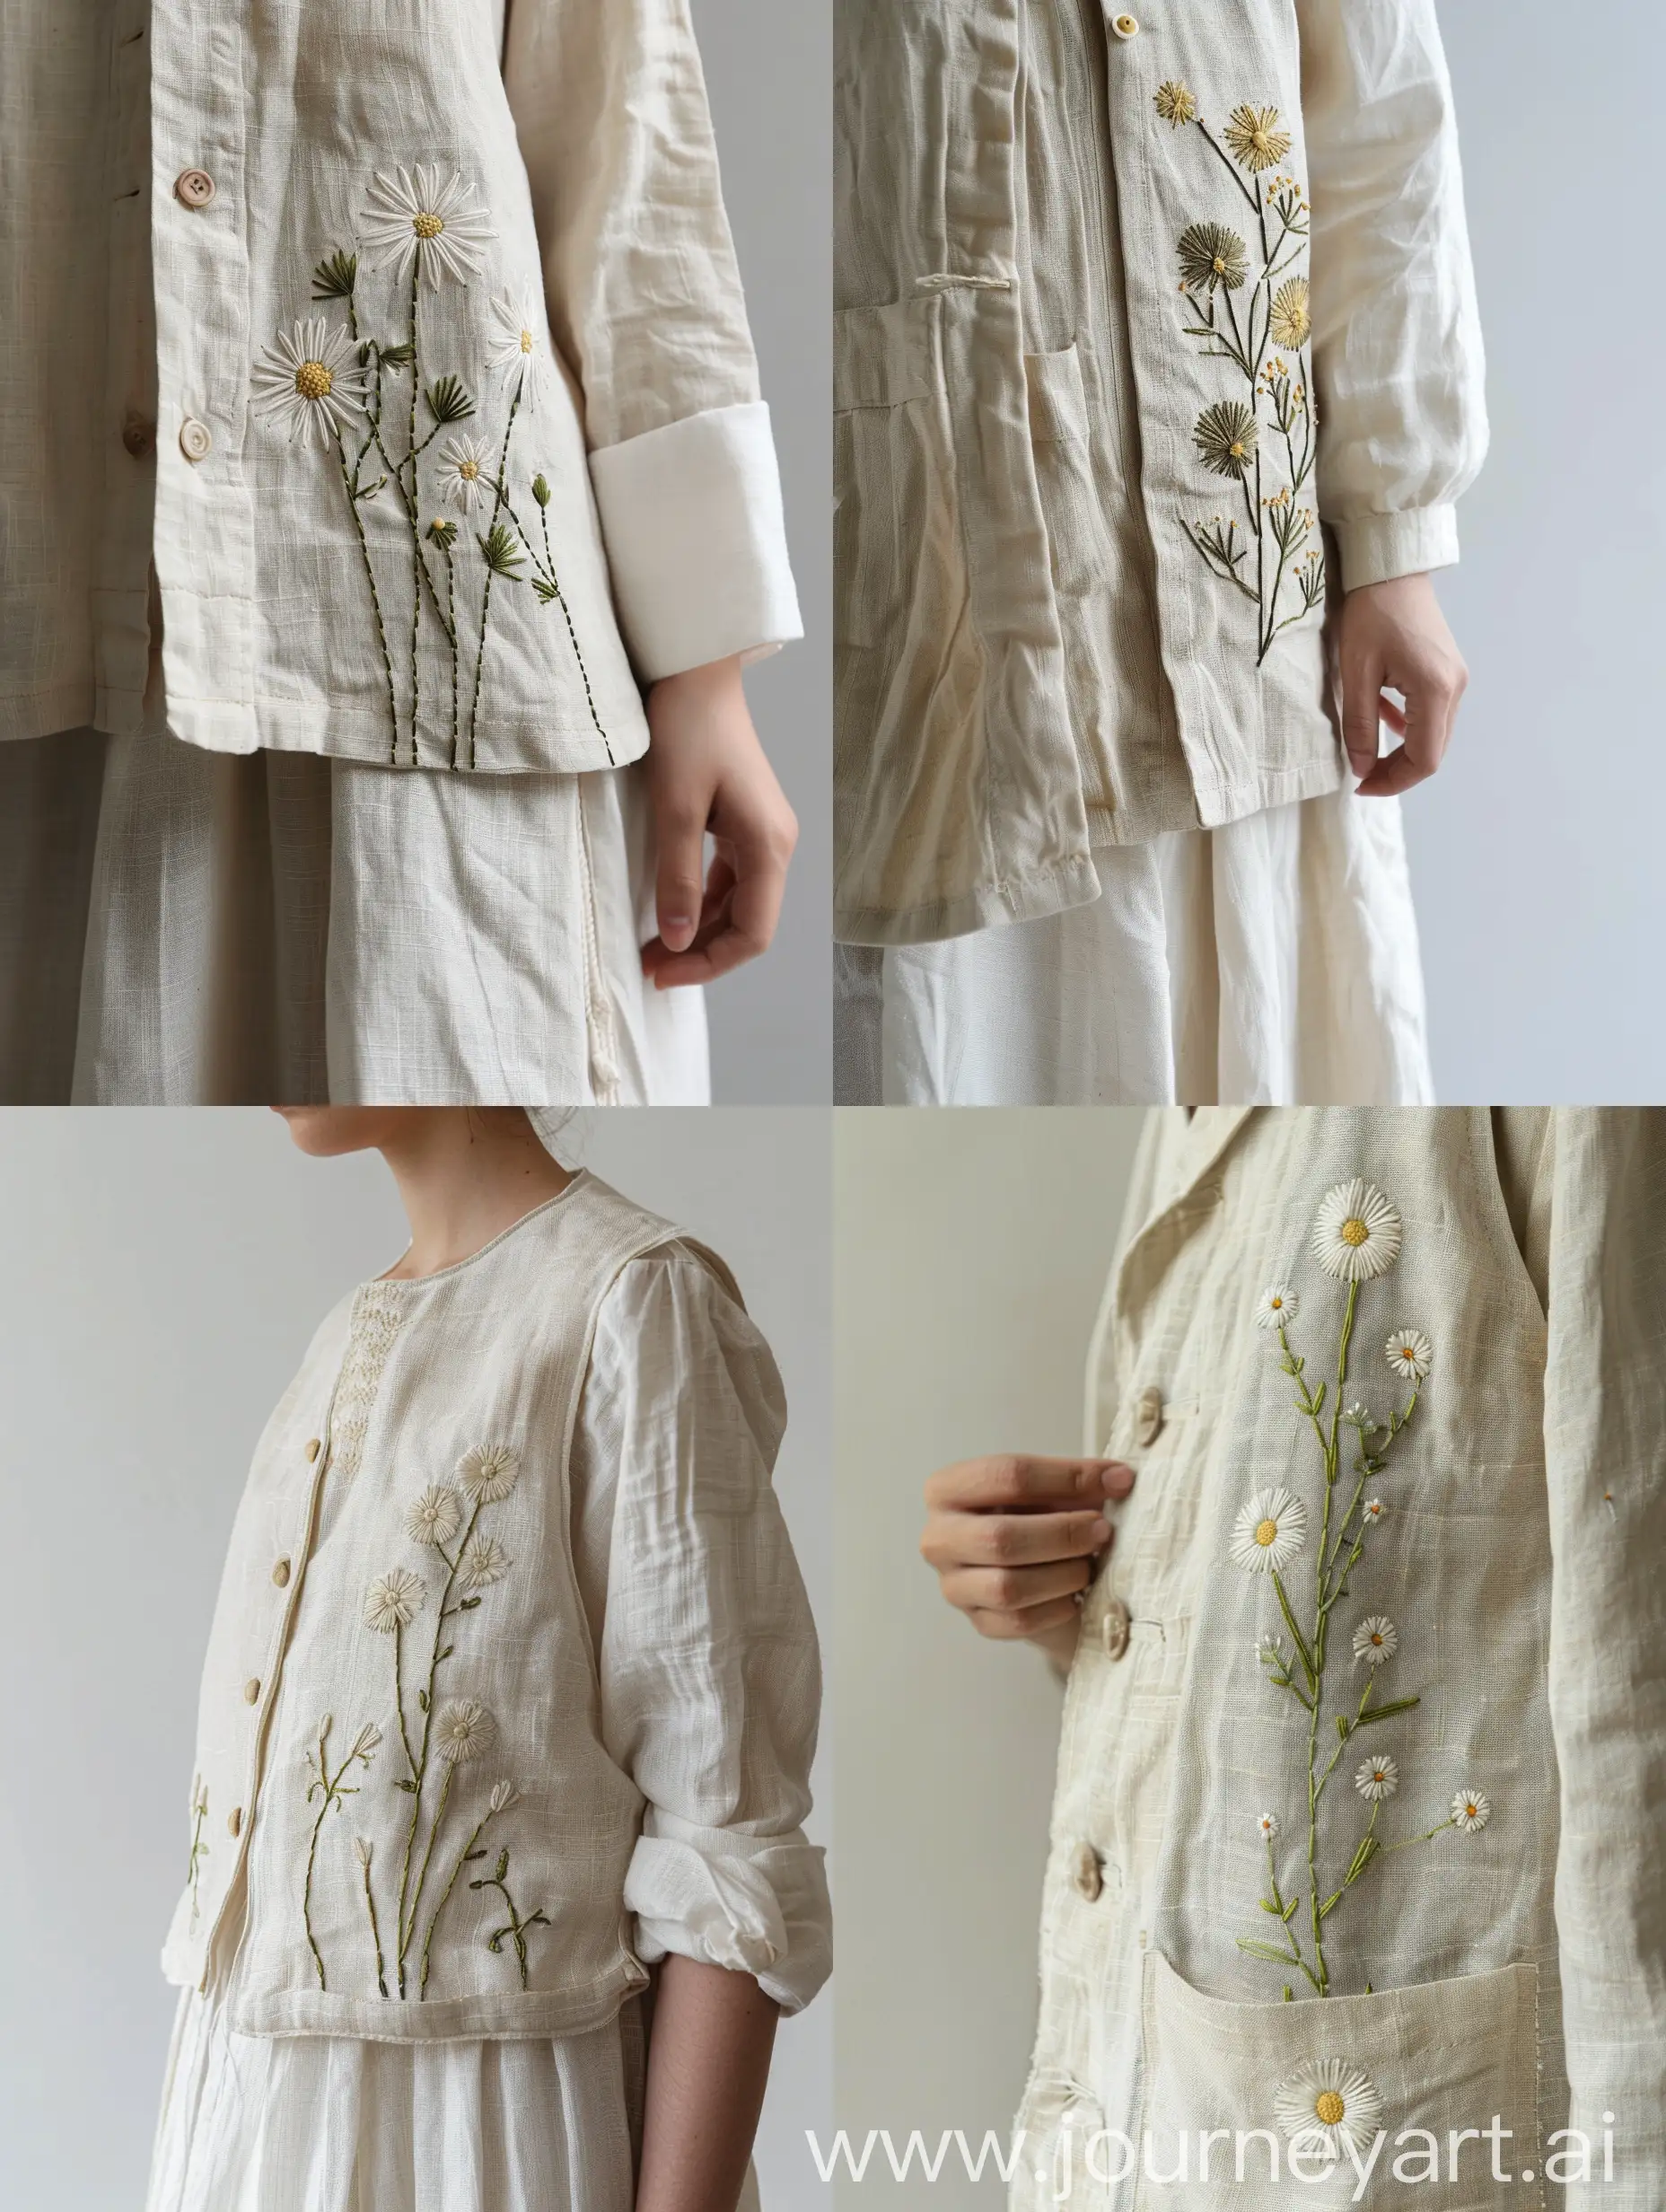 Jacket and vest, with embroidery, cream color, linen material, handmade embroidery design of chamomile flower, with small and low embroidery on one side.